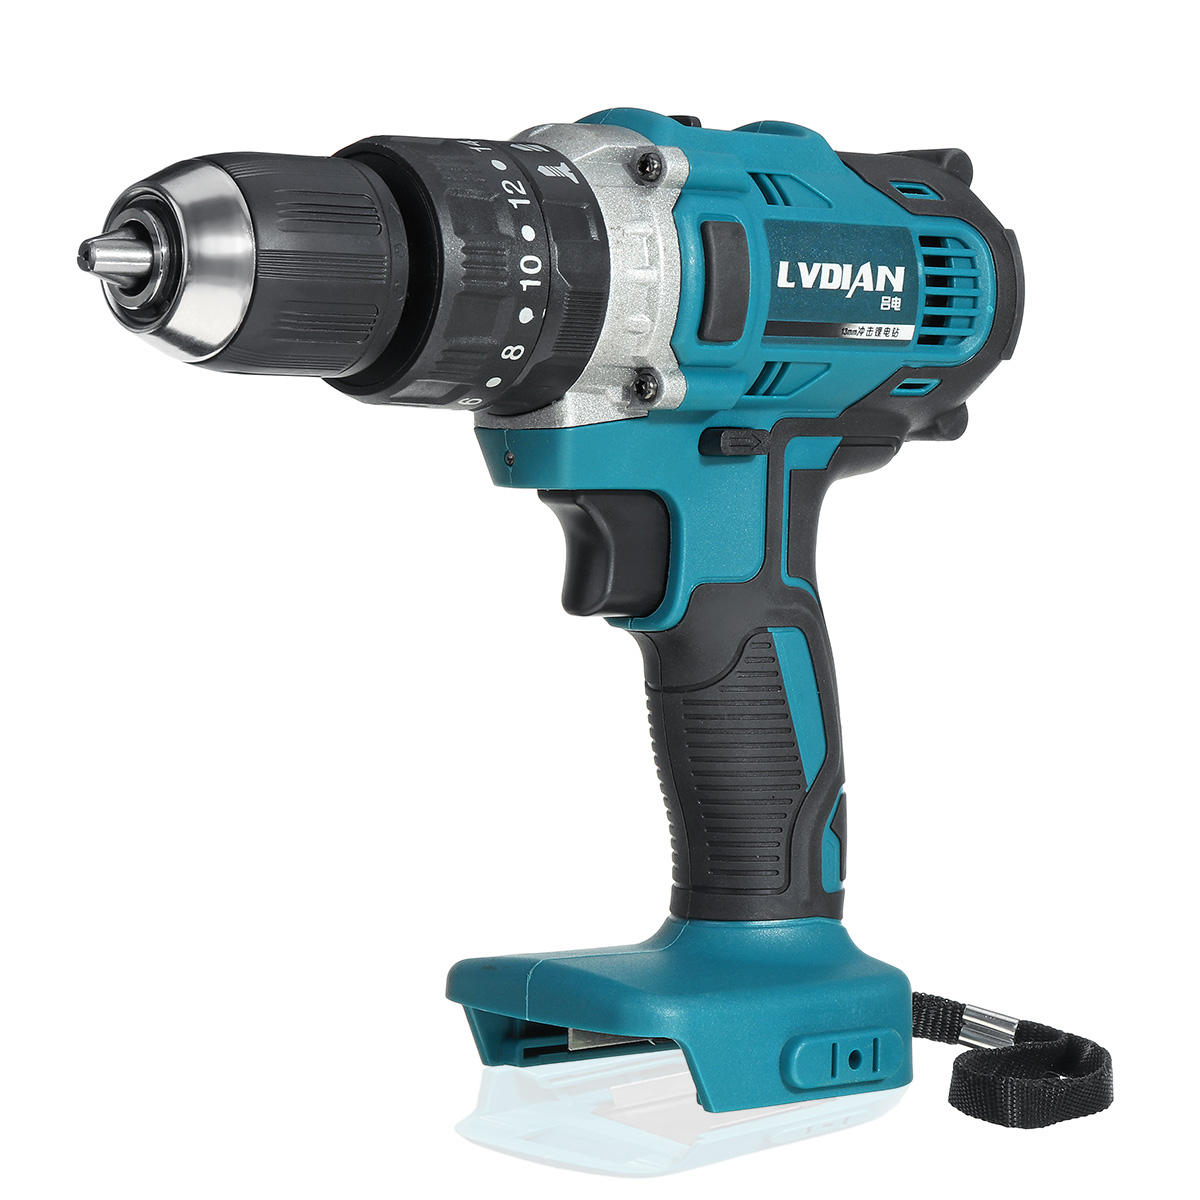 Image of Drillpro 18V 3 In 1 Cordless Impact Drill 2 Speed Rechargable Electric Screwdriver Drill Li-Ion Battery